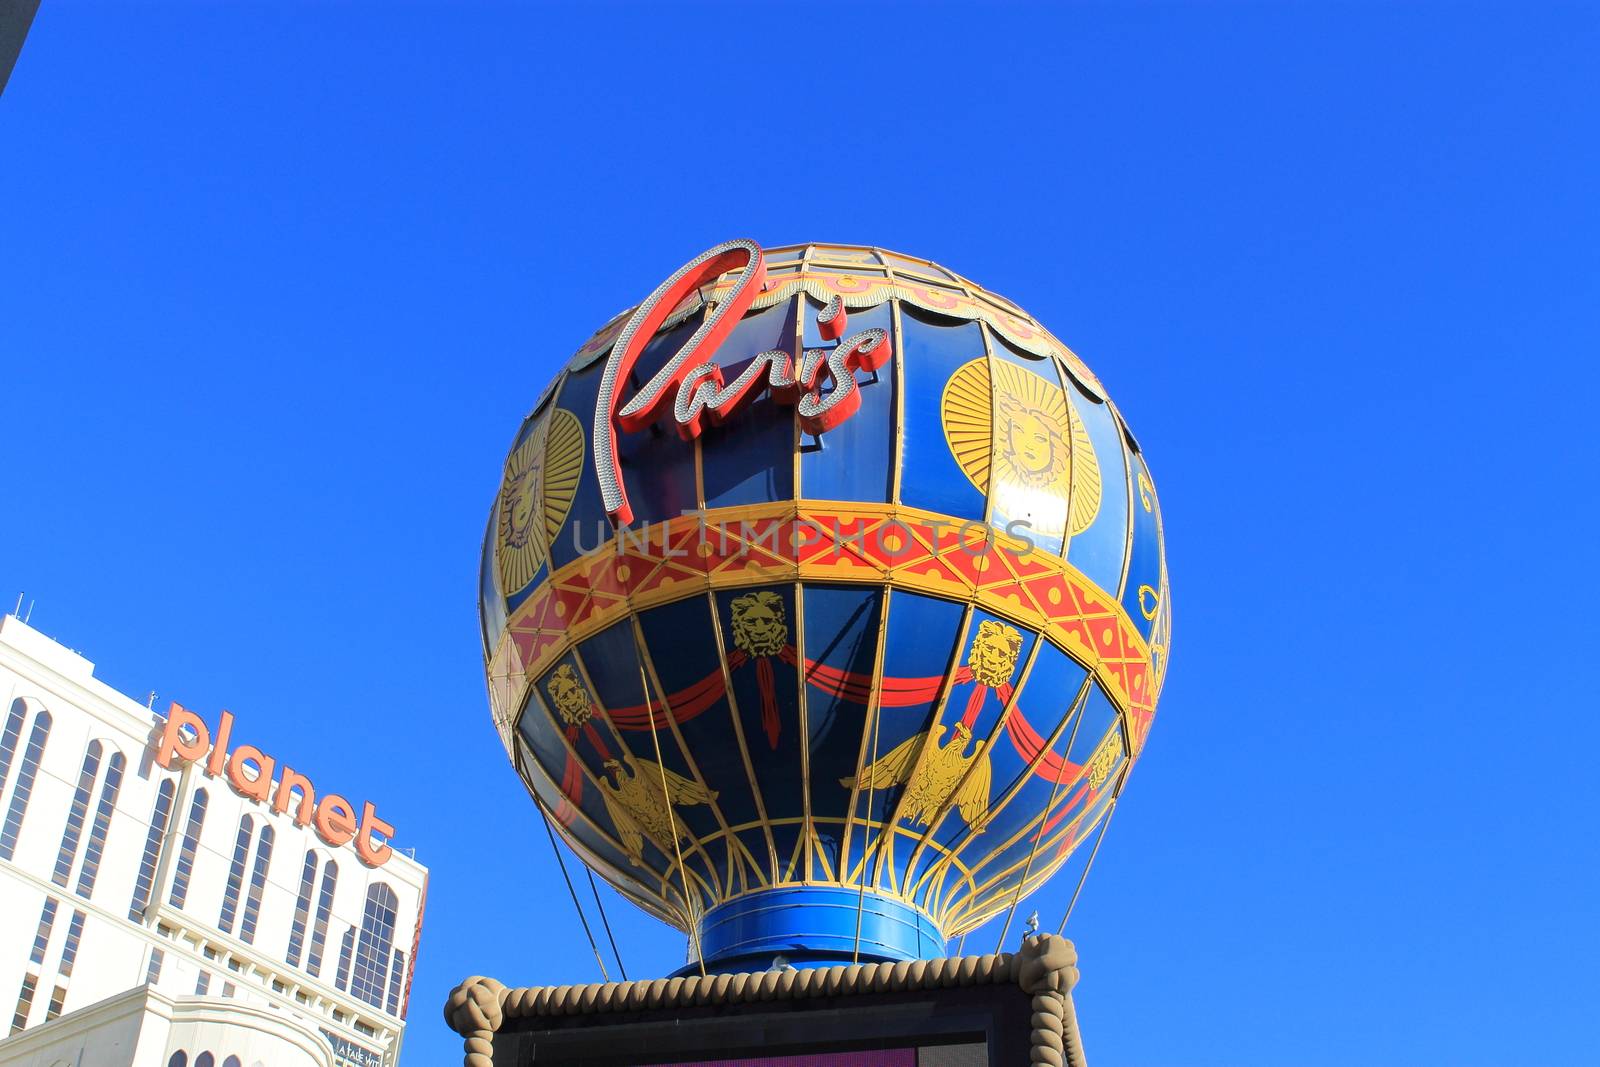 Paris Hotel and Casino on the Las Vegas Strip  The resort displays a replica of the Montgolfier balloon